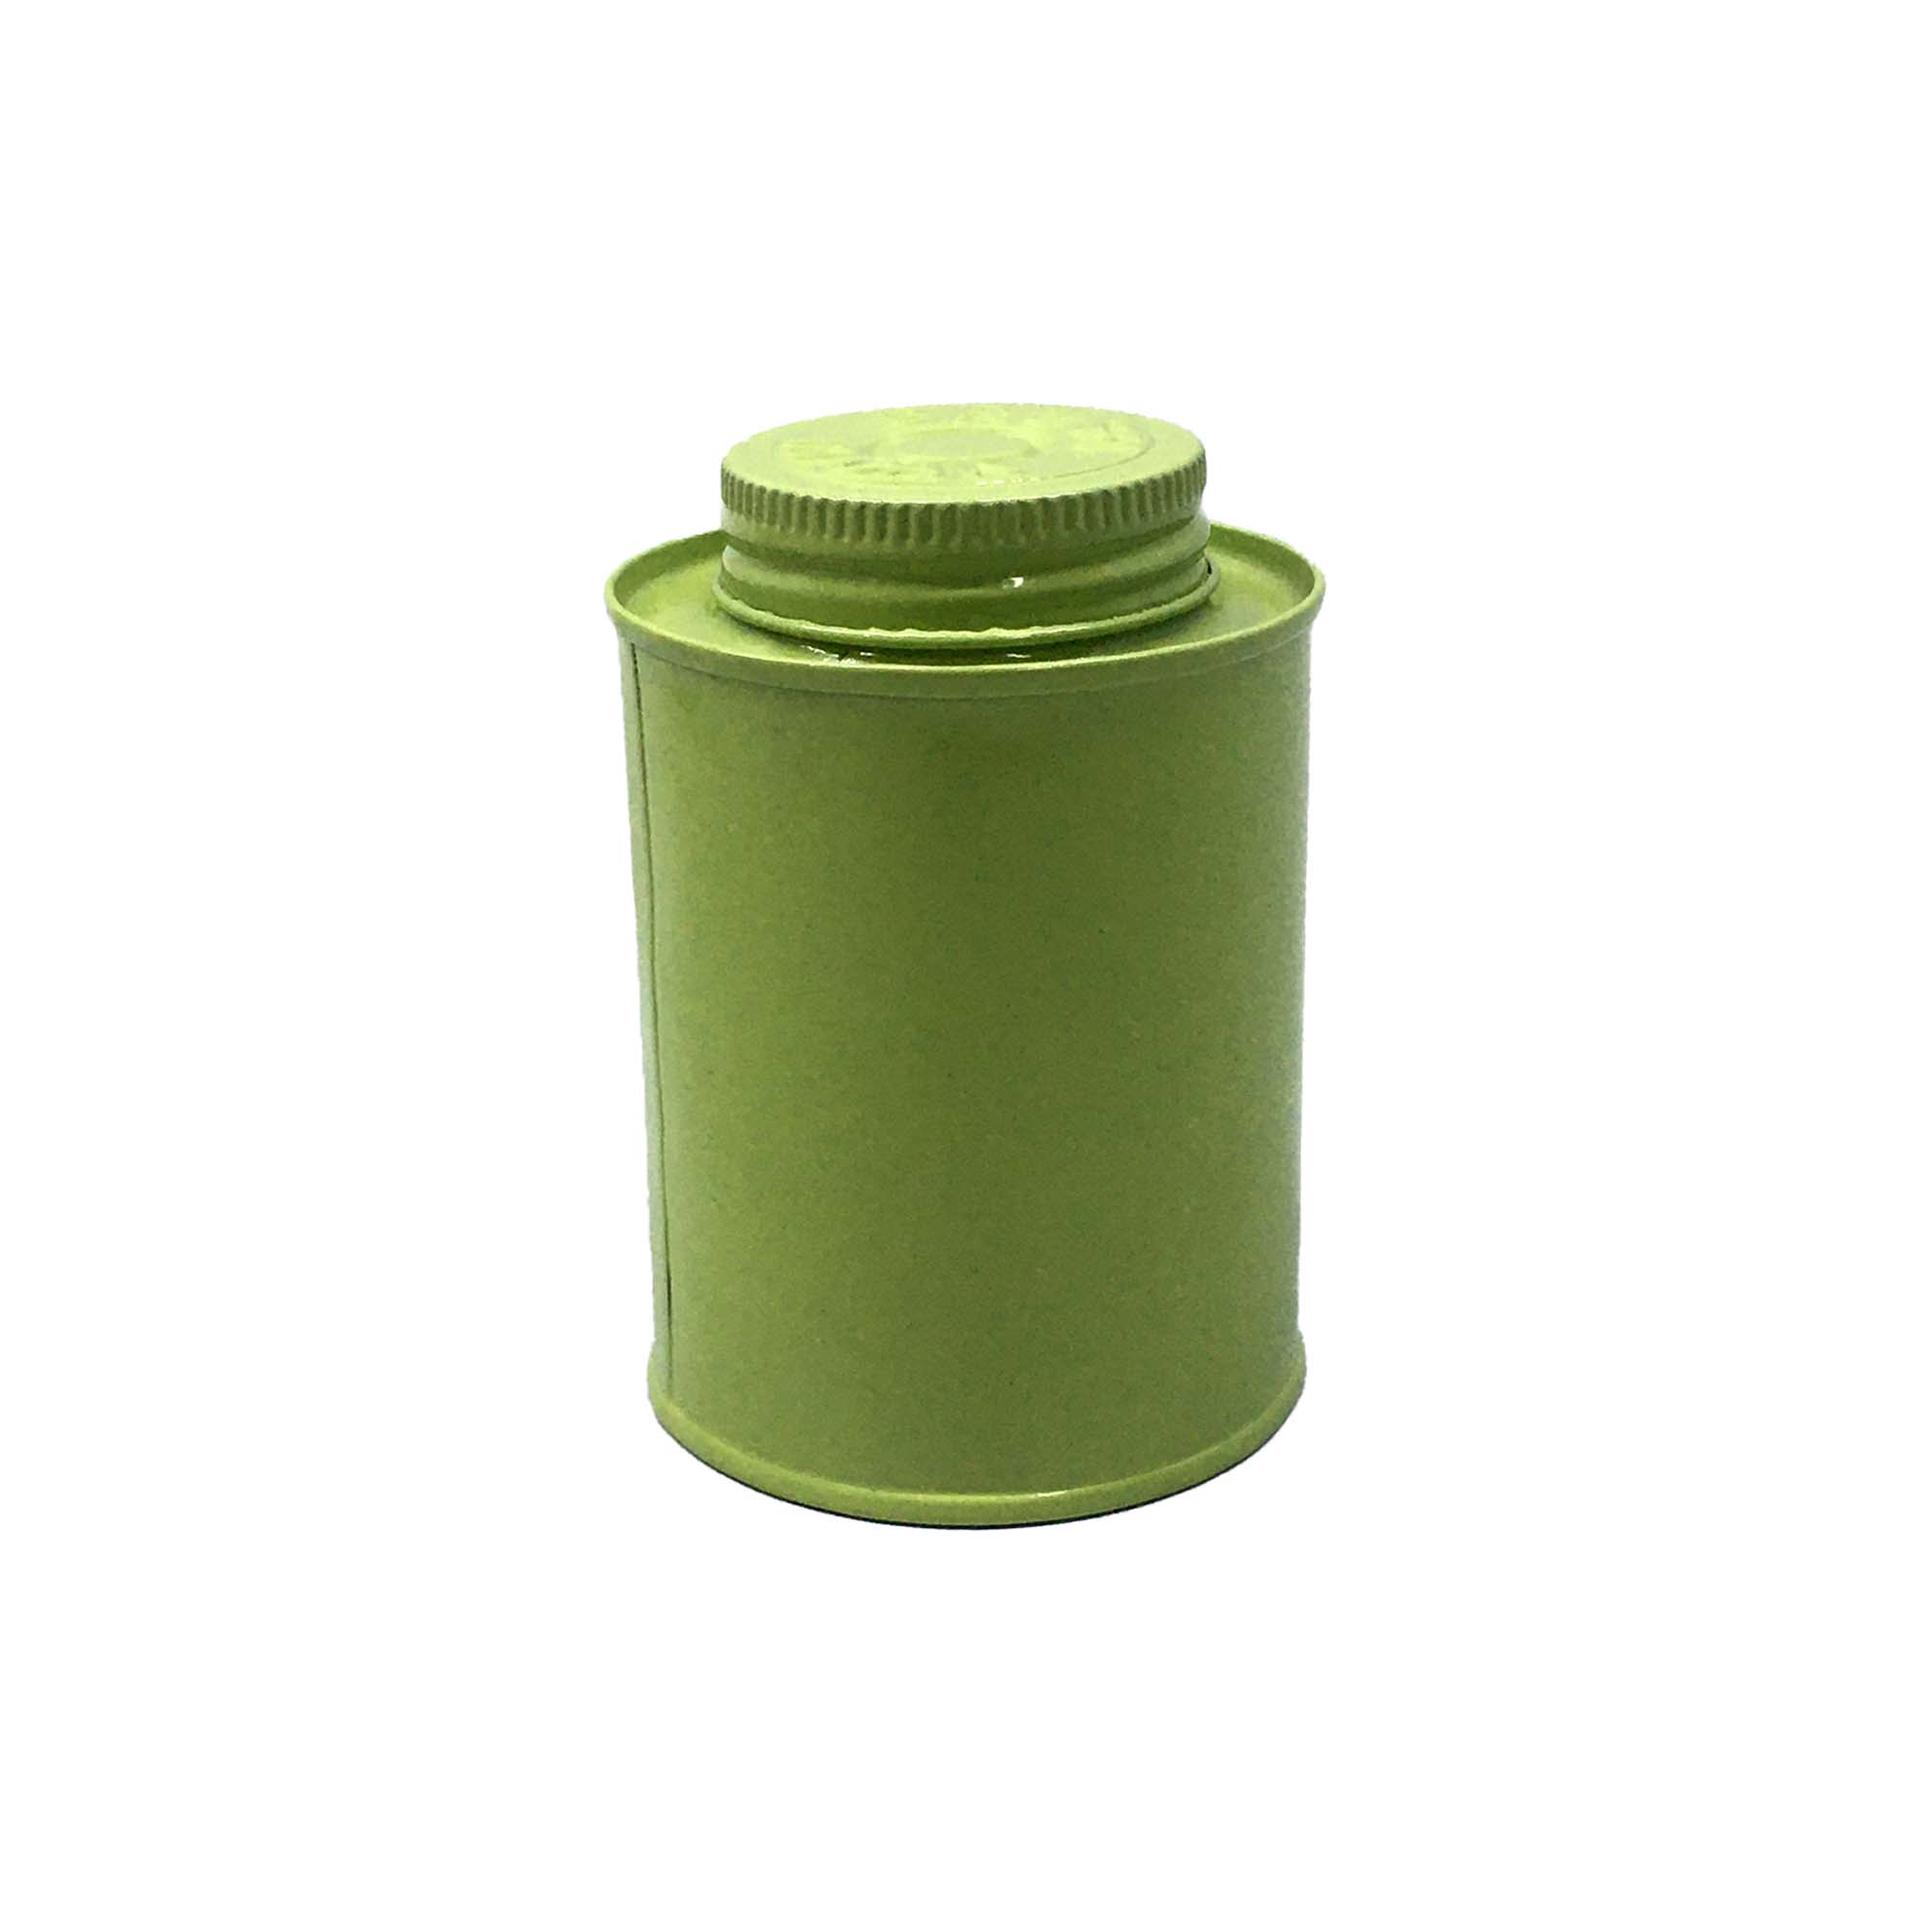 Vintage Spice Tin Cansiter Lime Green 6x9.5cm